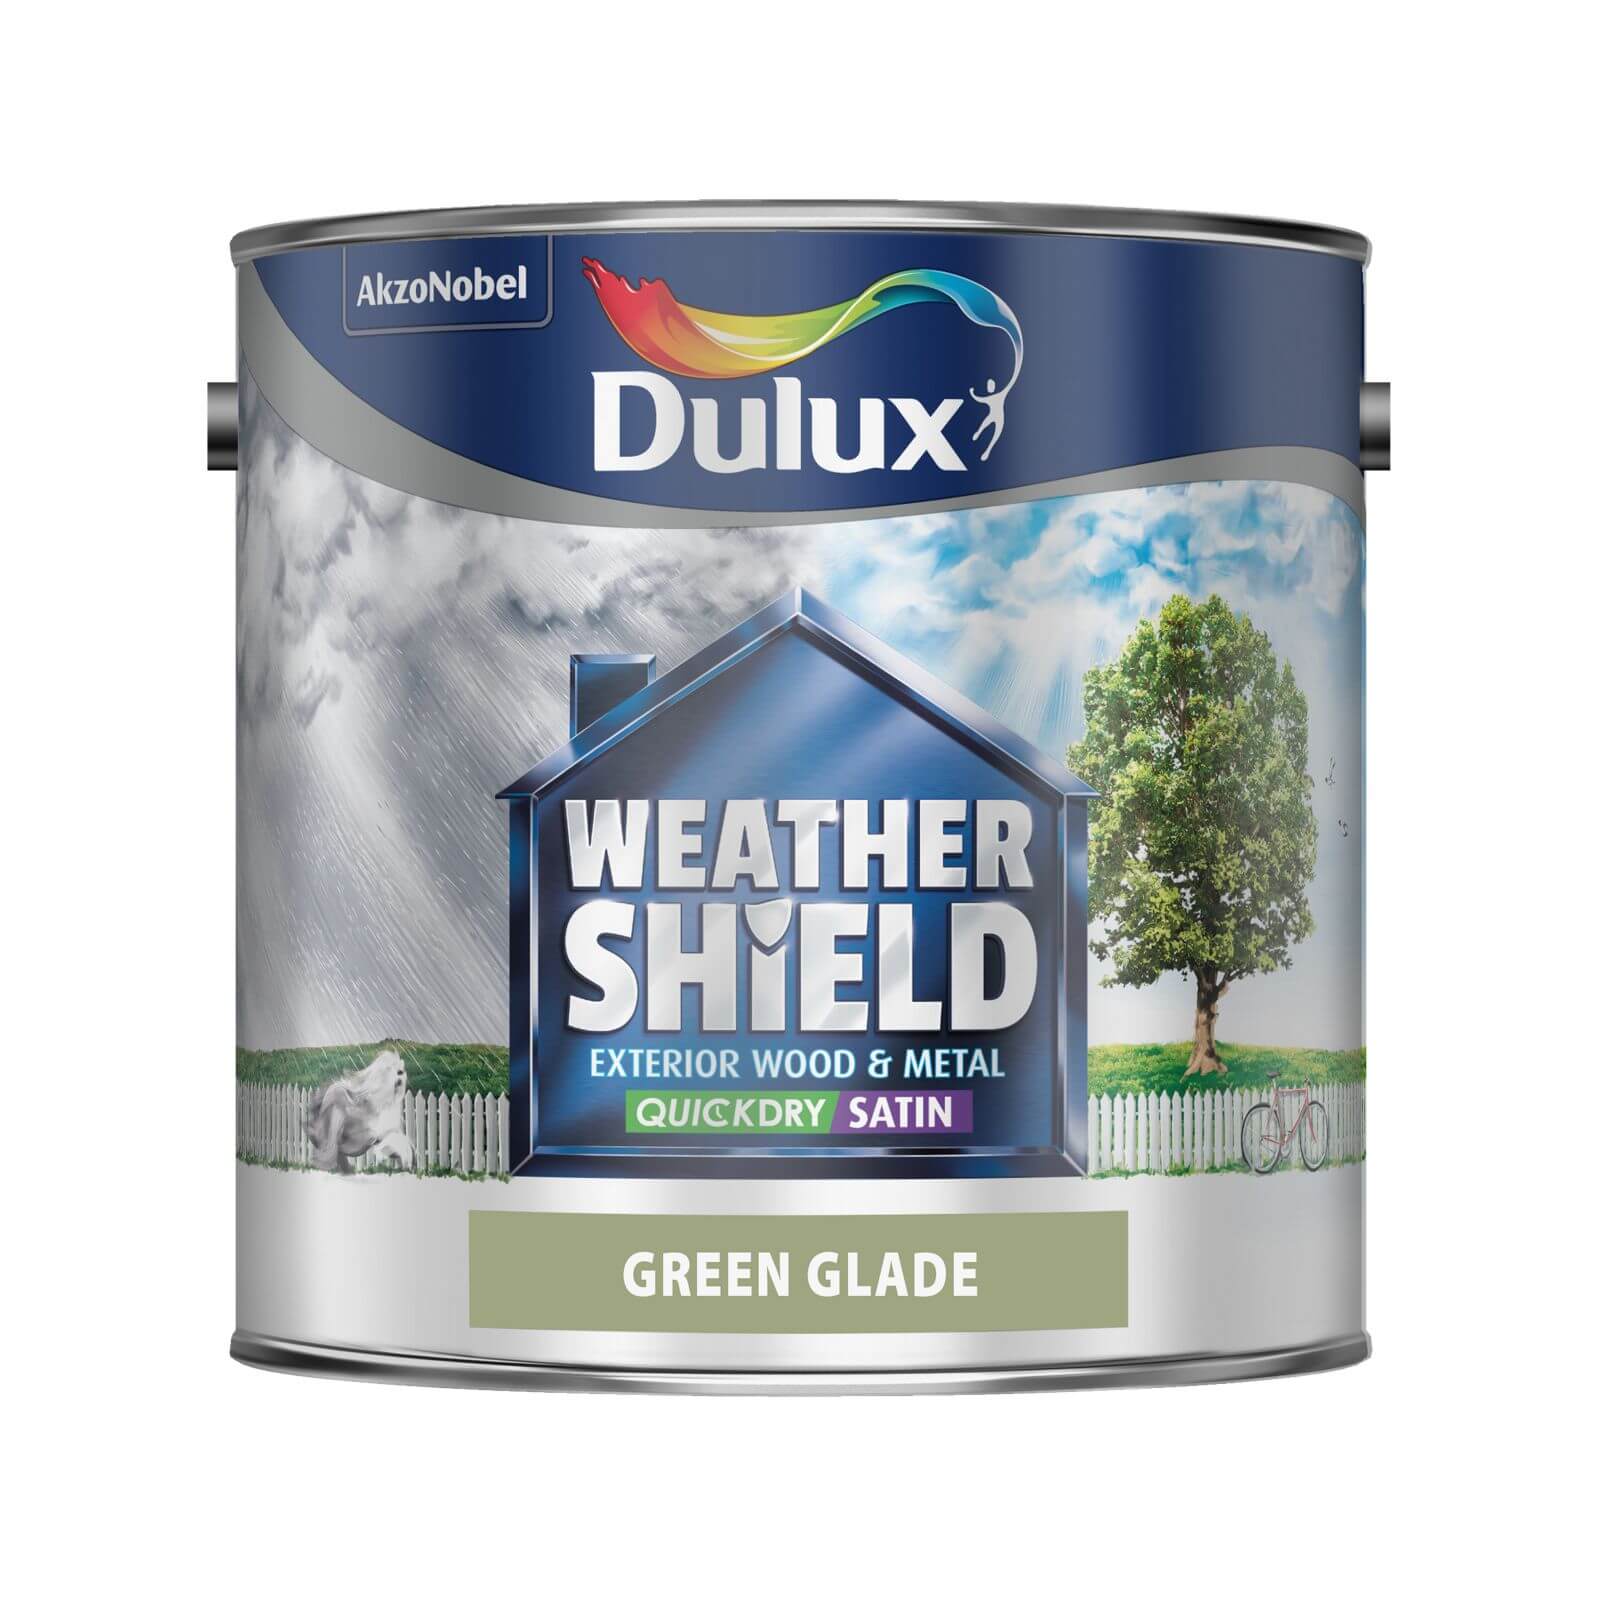 Dulux Weathershield Exterior Quick Dry Satin Paint Green Glade - 2.5L